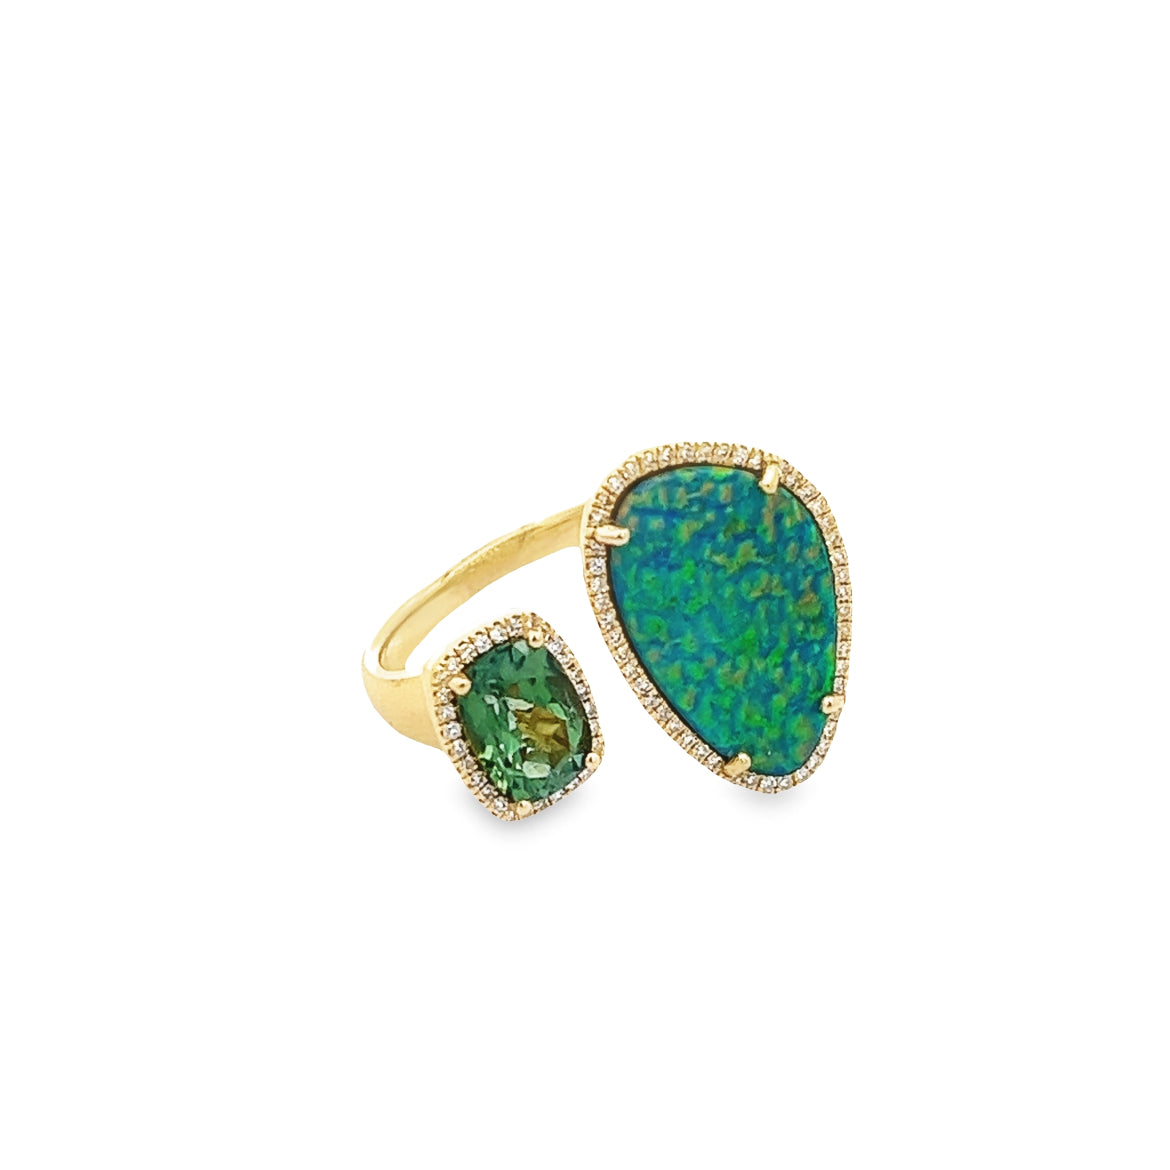 14K GOLD OPAL AND TURMALINE RING WITH HALO